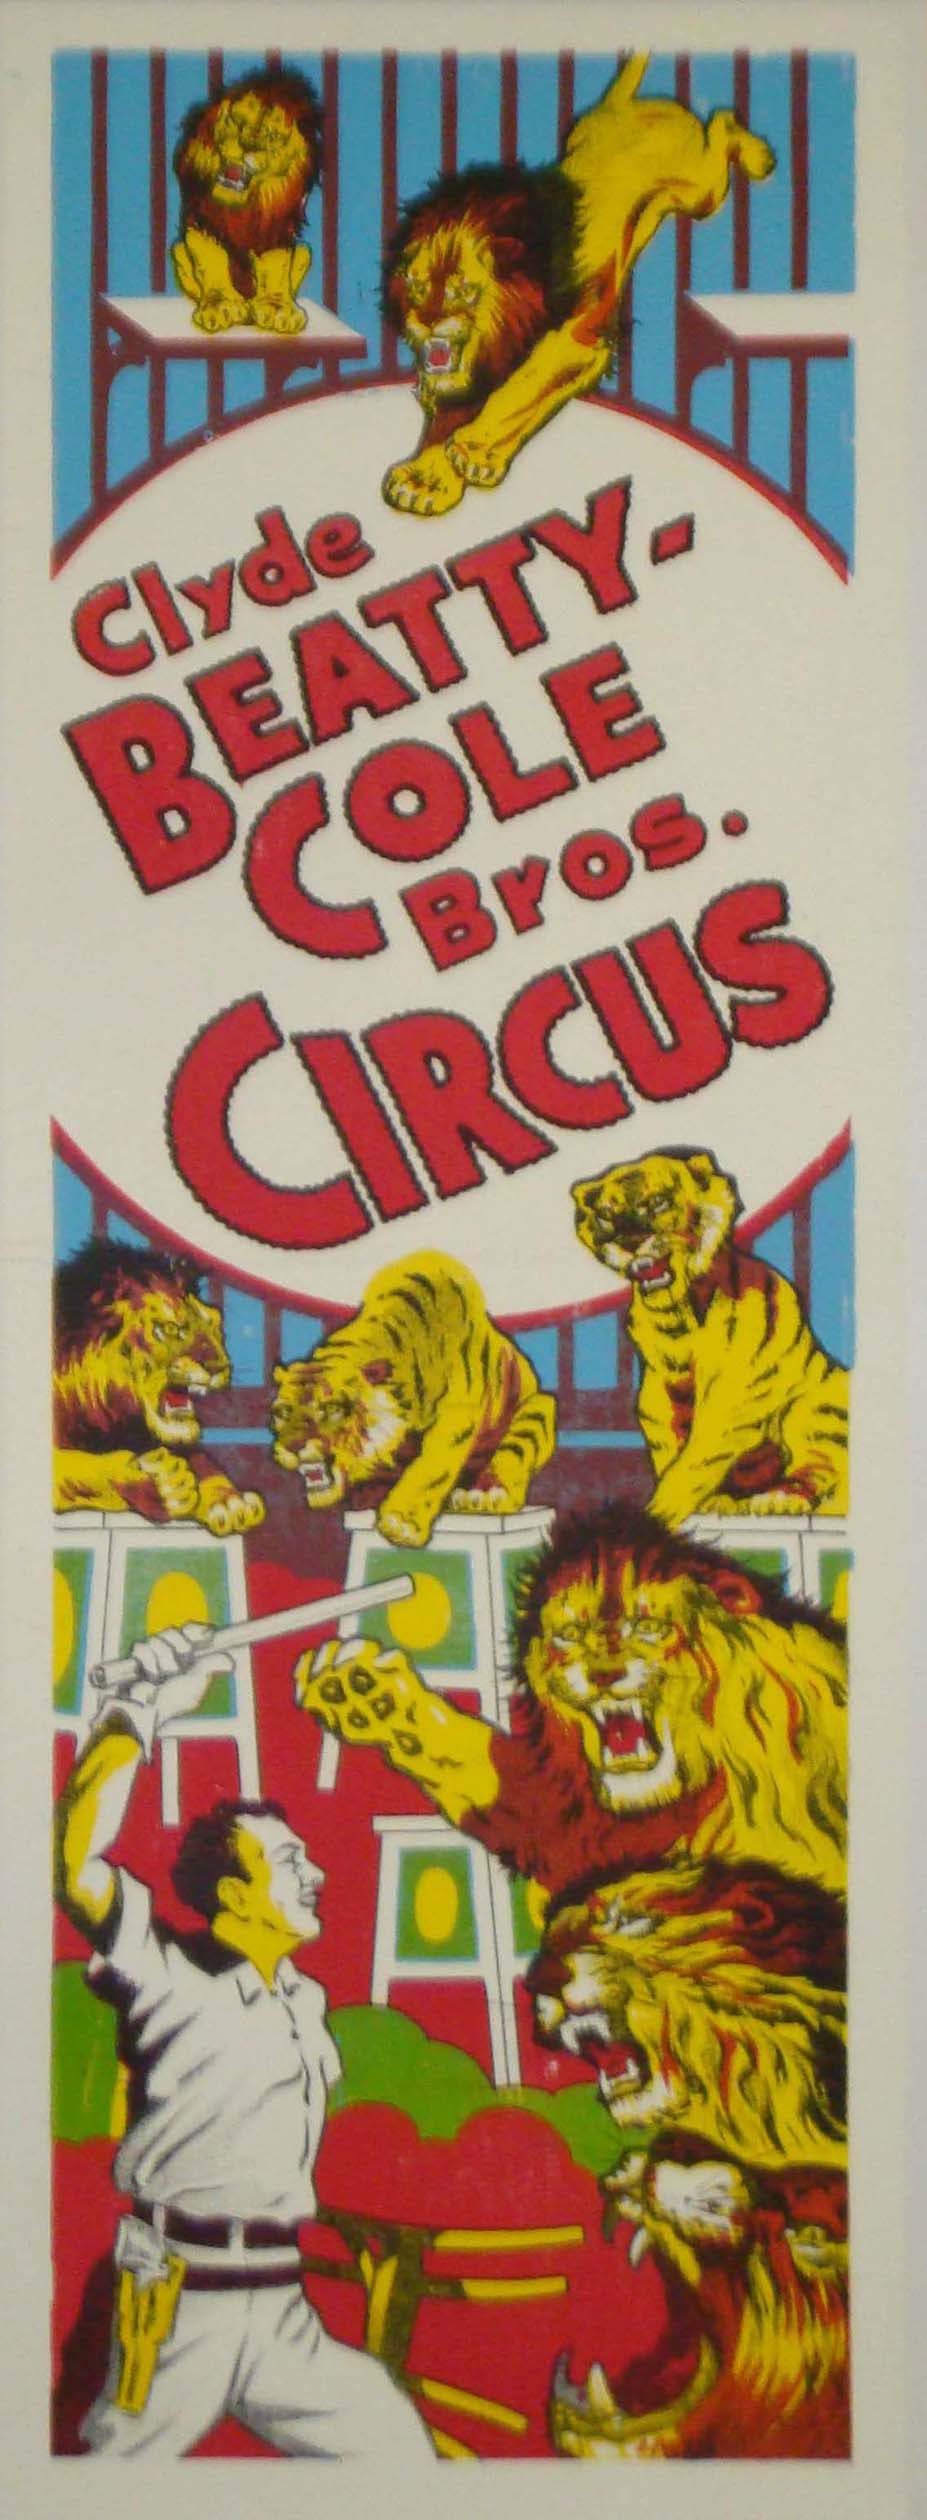 Clyde Beatty - Cole Brothers Circus